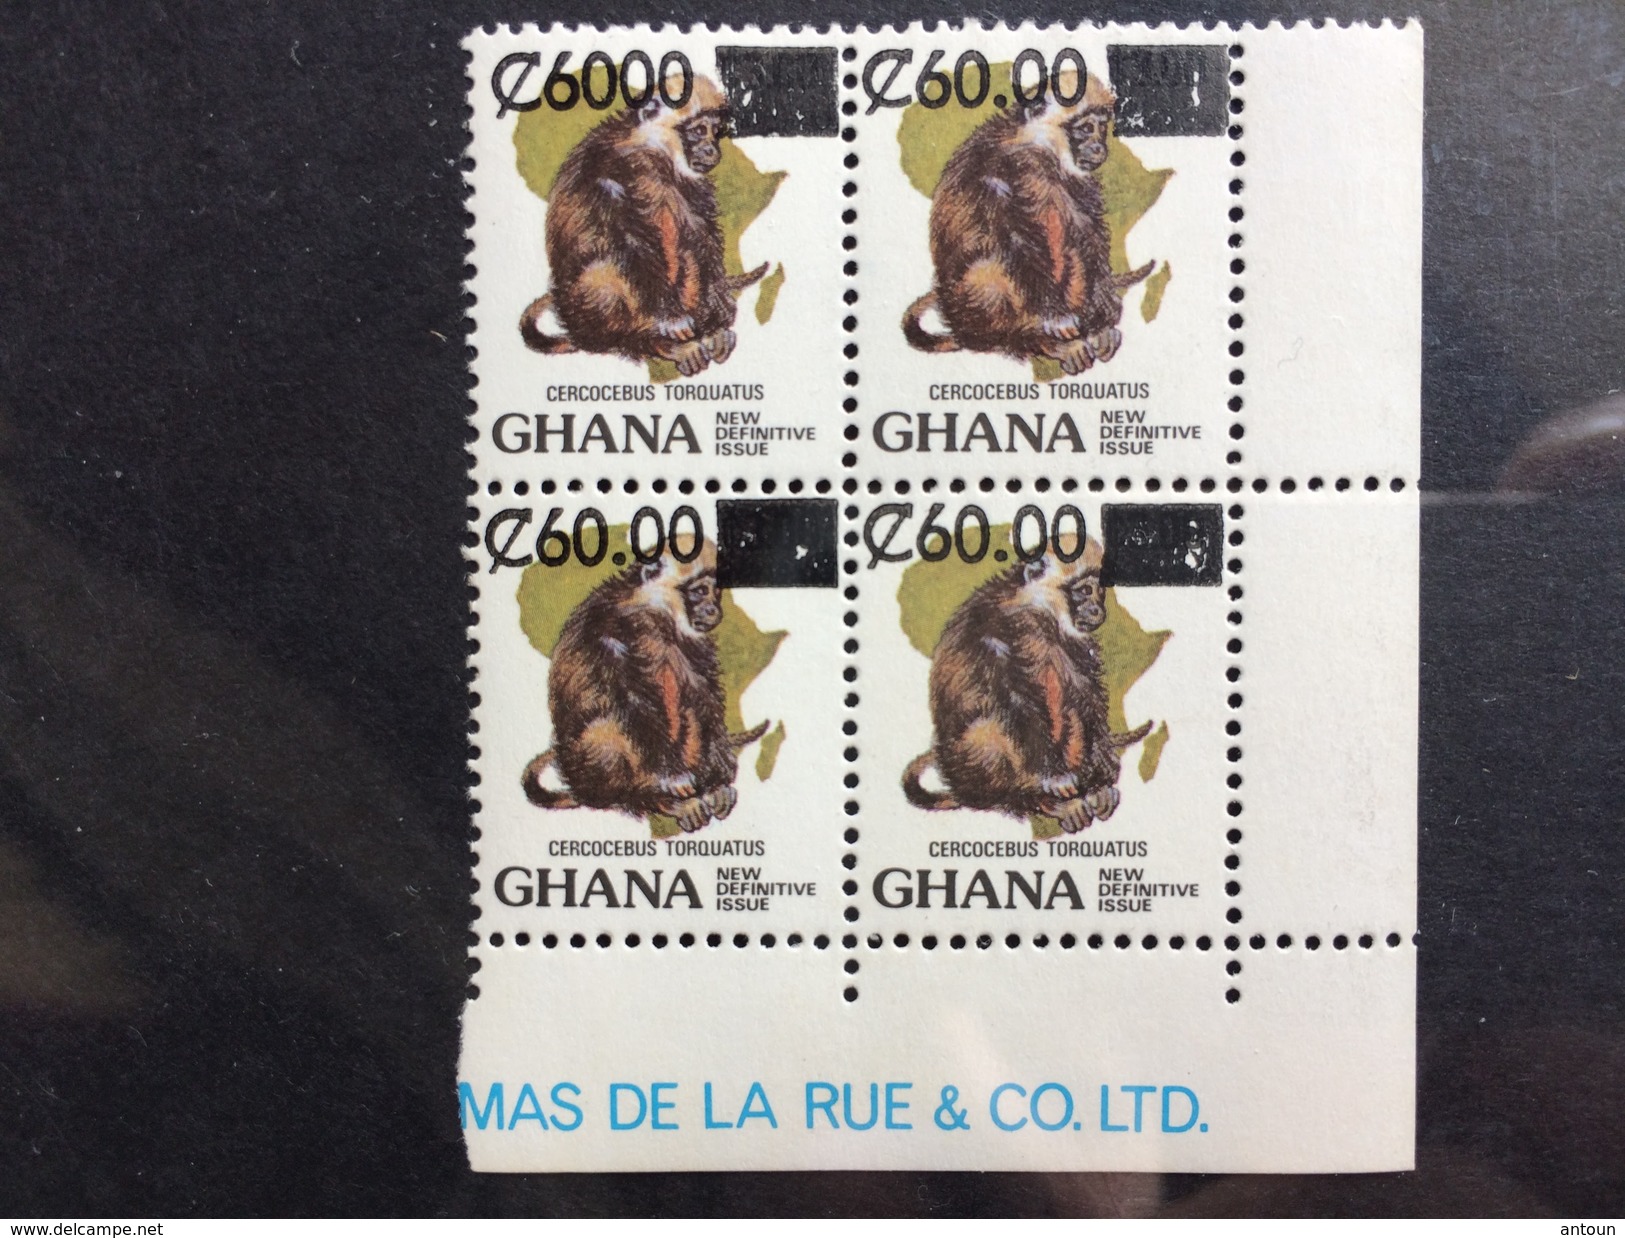 Ghana Definitive Surcharge 1988 - Block Of 4 - Decimal Point Omitted - Becomes C 6000 Instead Of C 60.00 - Ghana (1957-...)